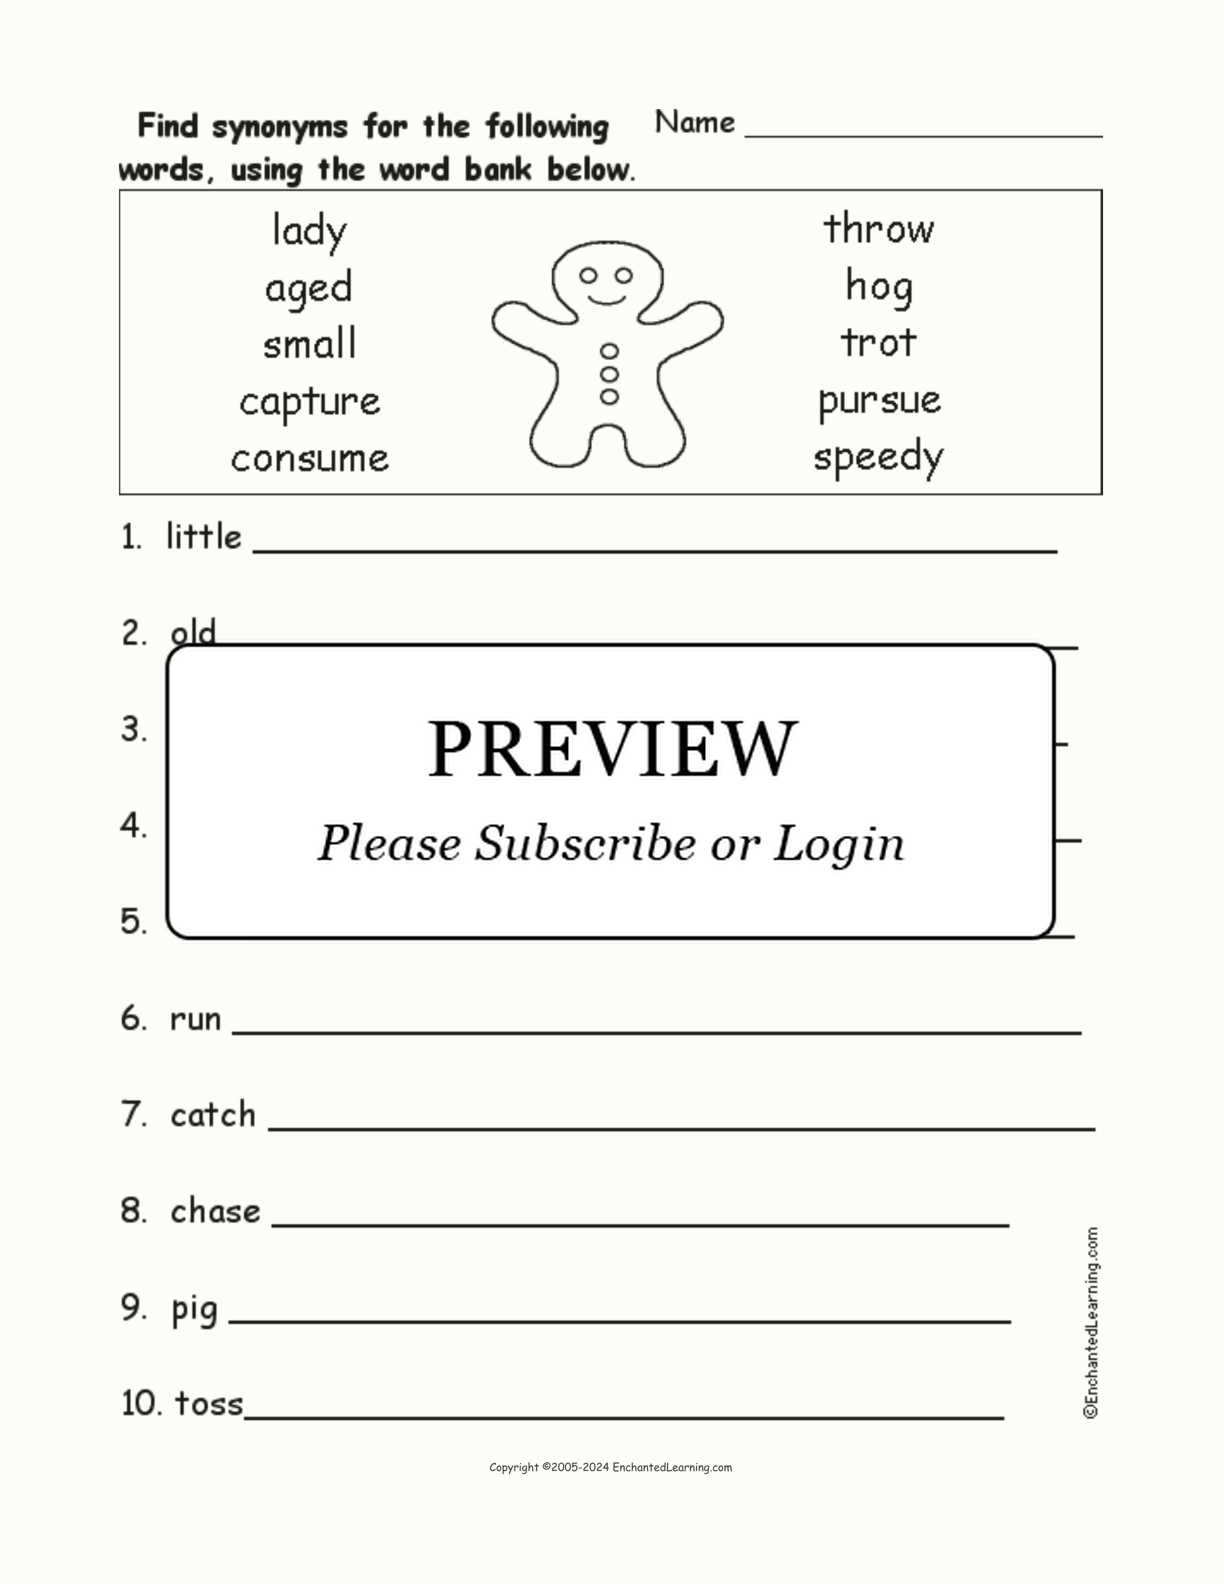 'The Gingerbread Man' Synonyms interactive worksheet page 1